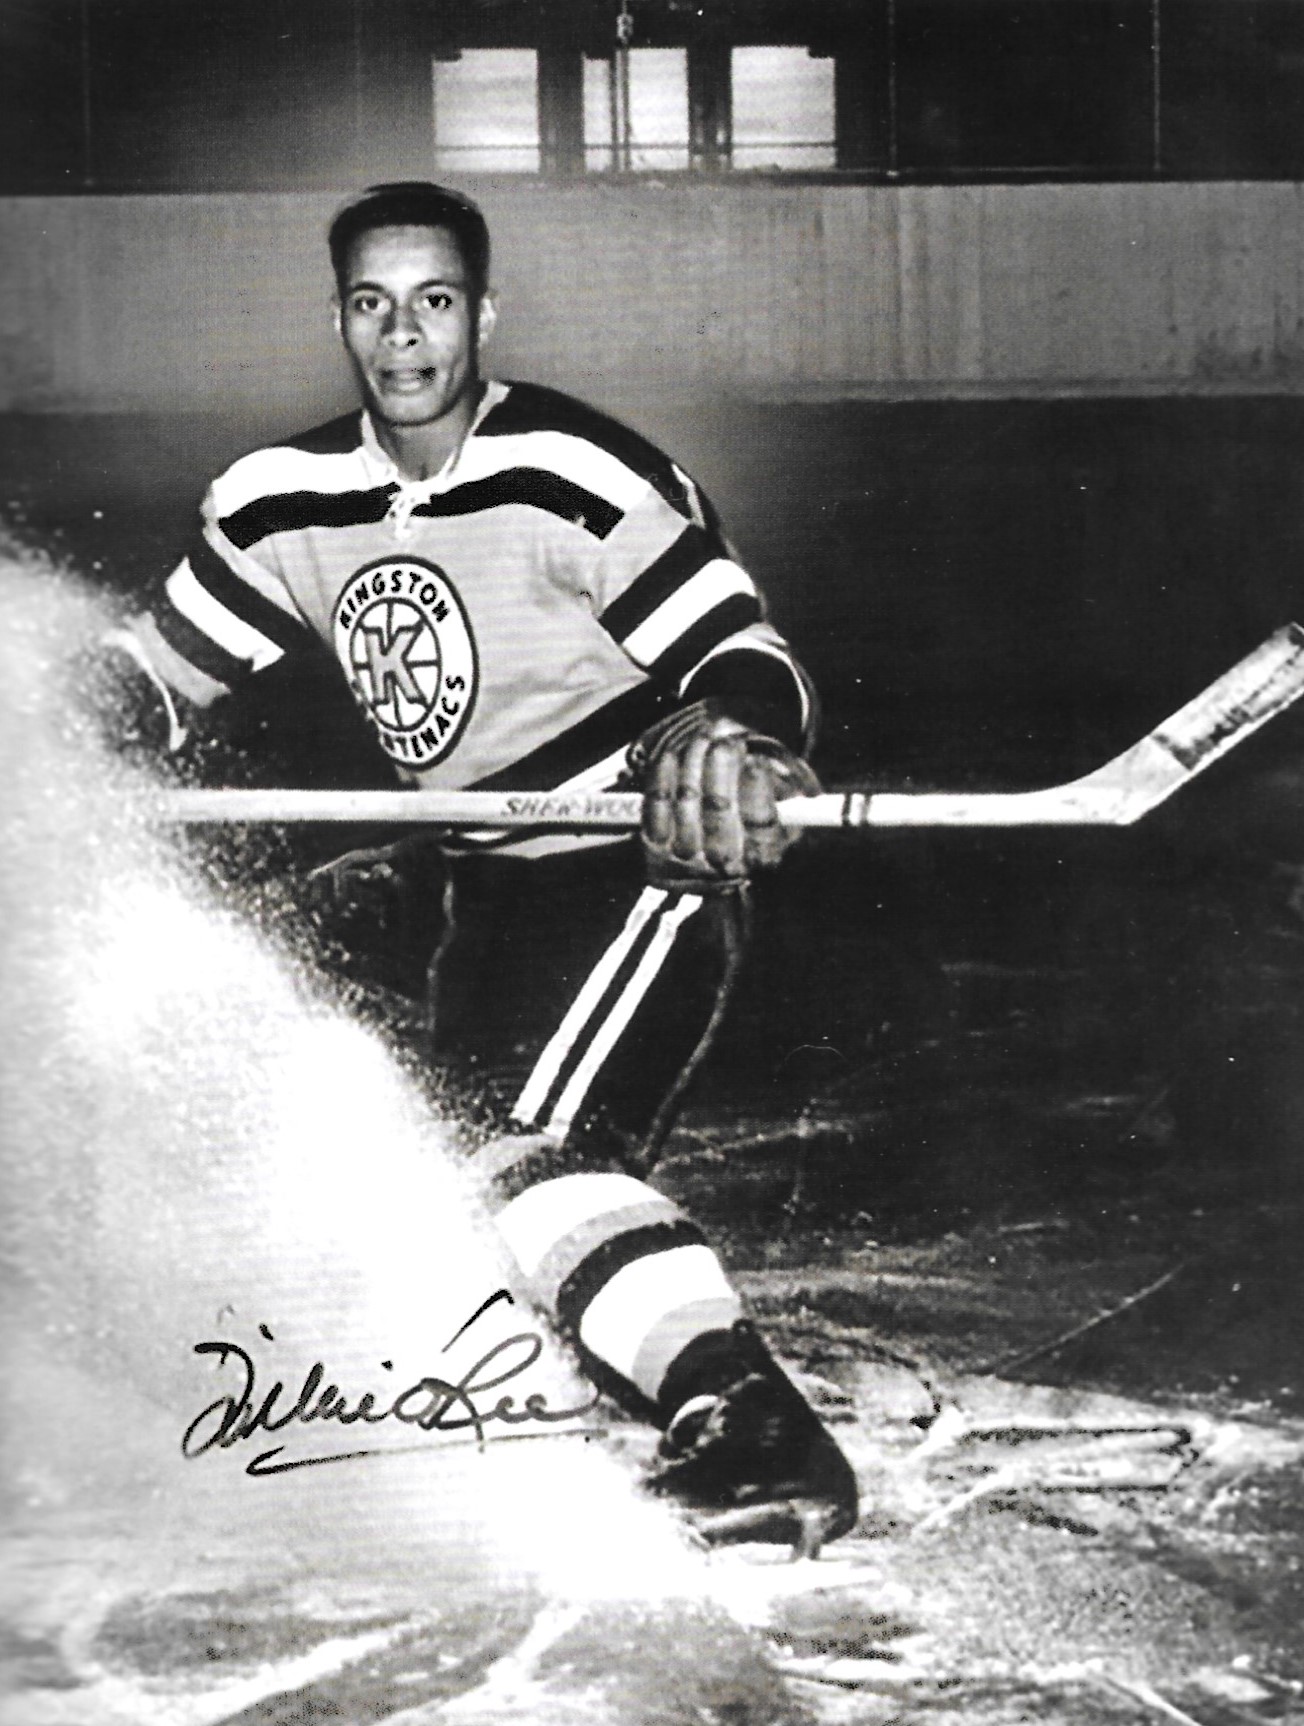 Bruins to retire Willie O'Ree's number